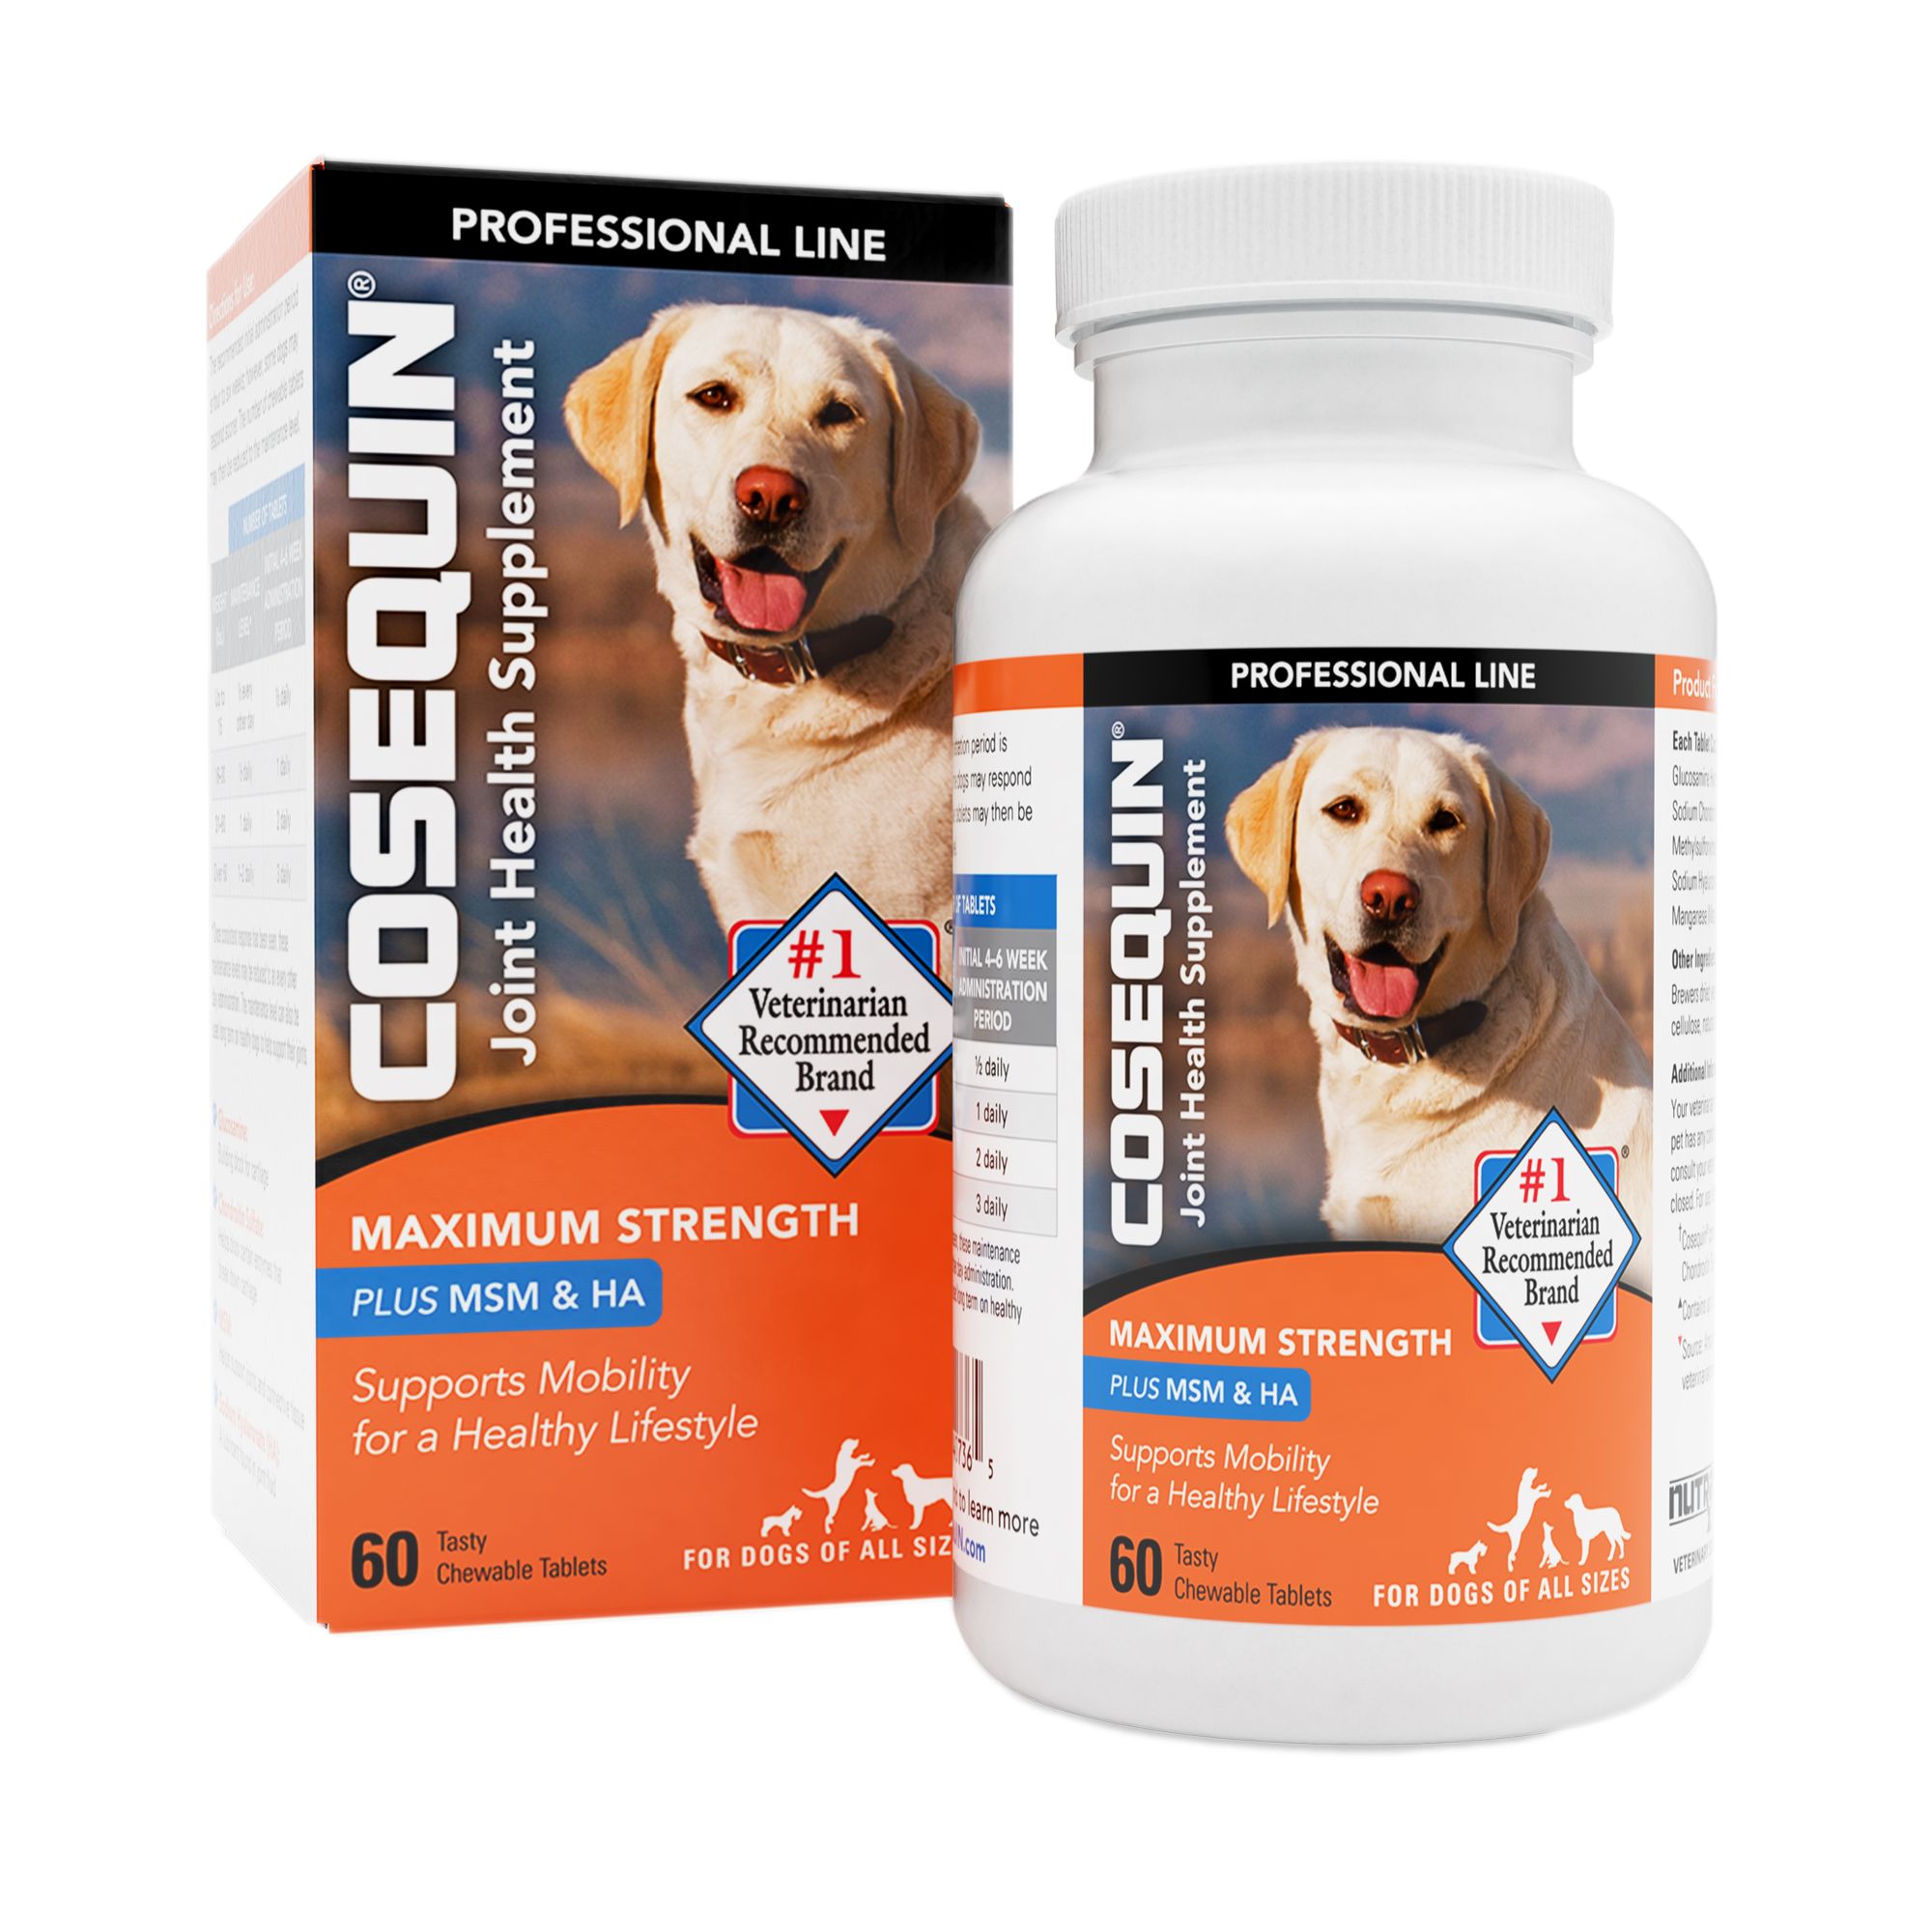 Cosequin Nutramax Professional Joint Health Dog Supplement Chewable 